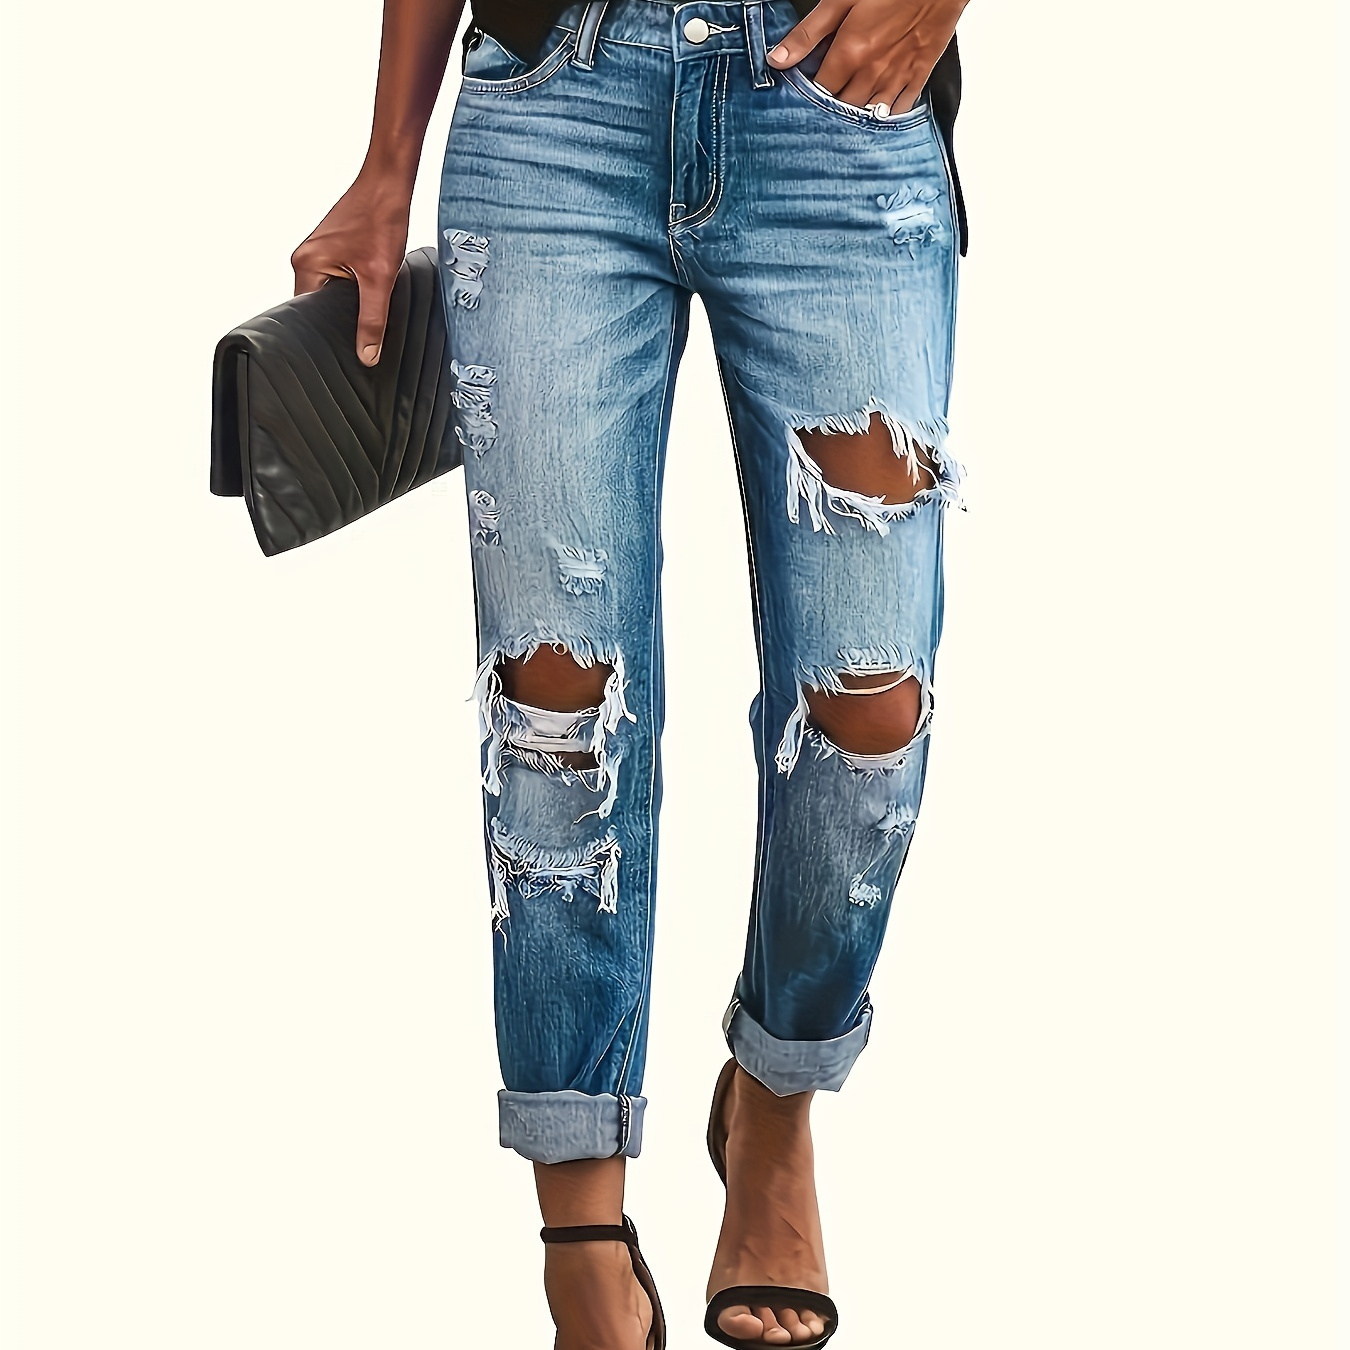 

Women's Distressed Ripped Jeans, Street Style, Ankle-length Denim Pants With Pockets, Casual Torn Trendy Trousers For Daily Wear Suit For Autumn